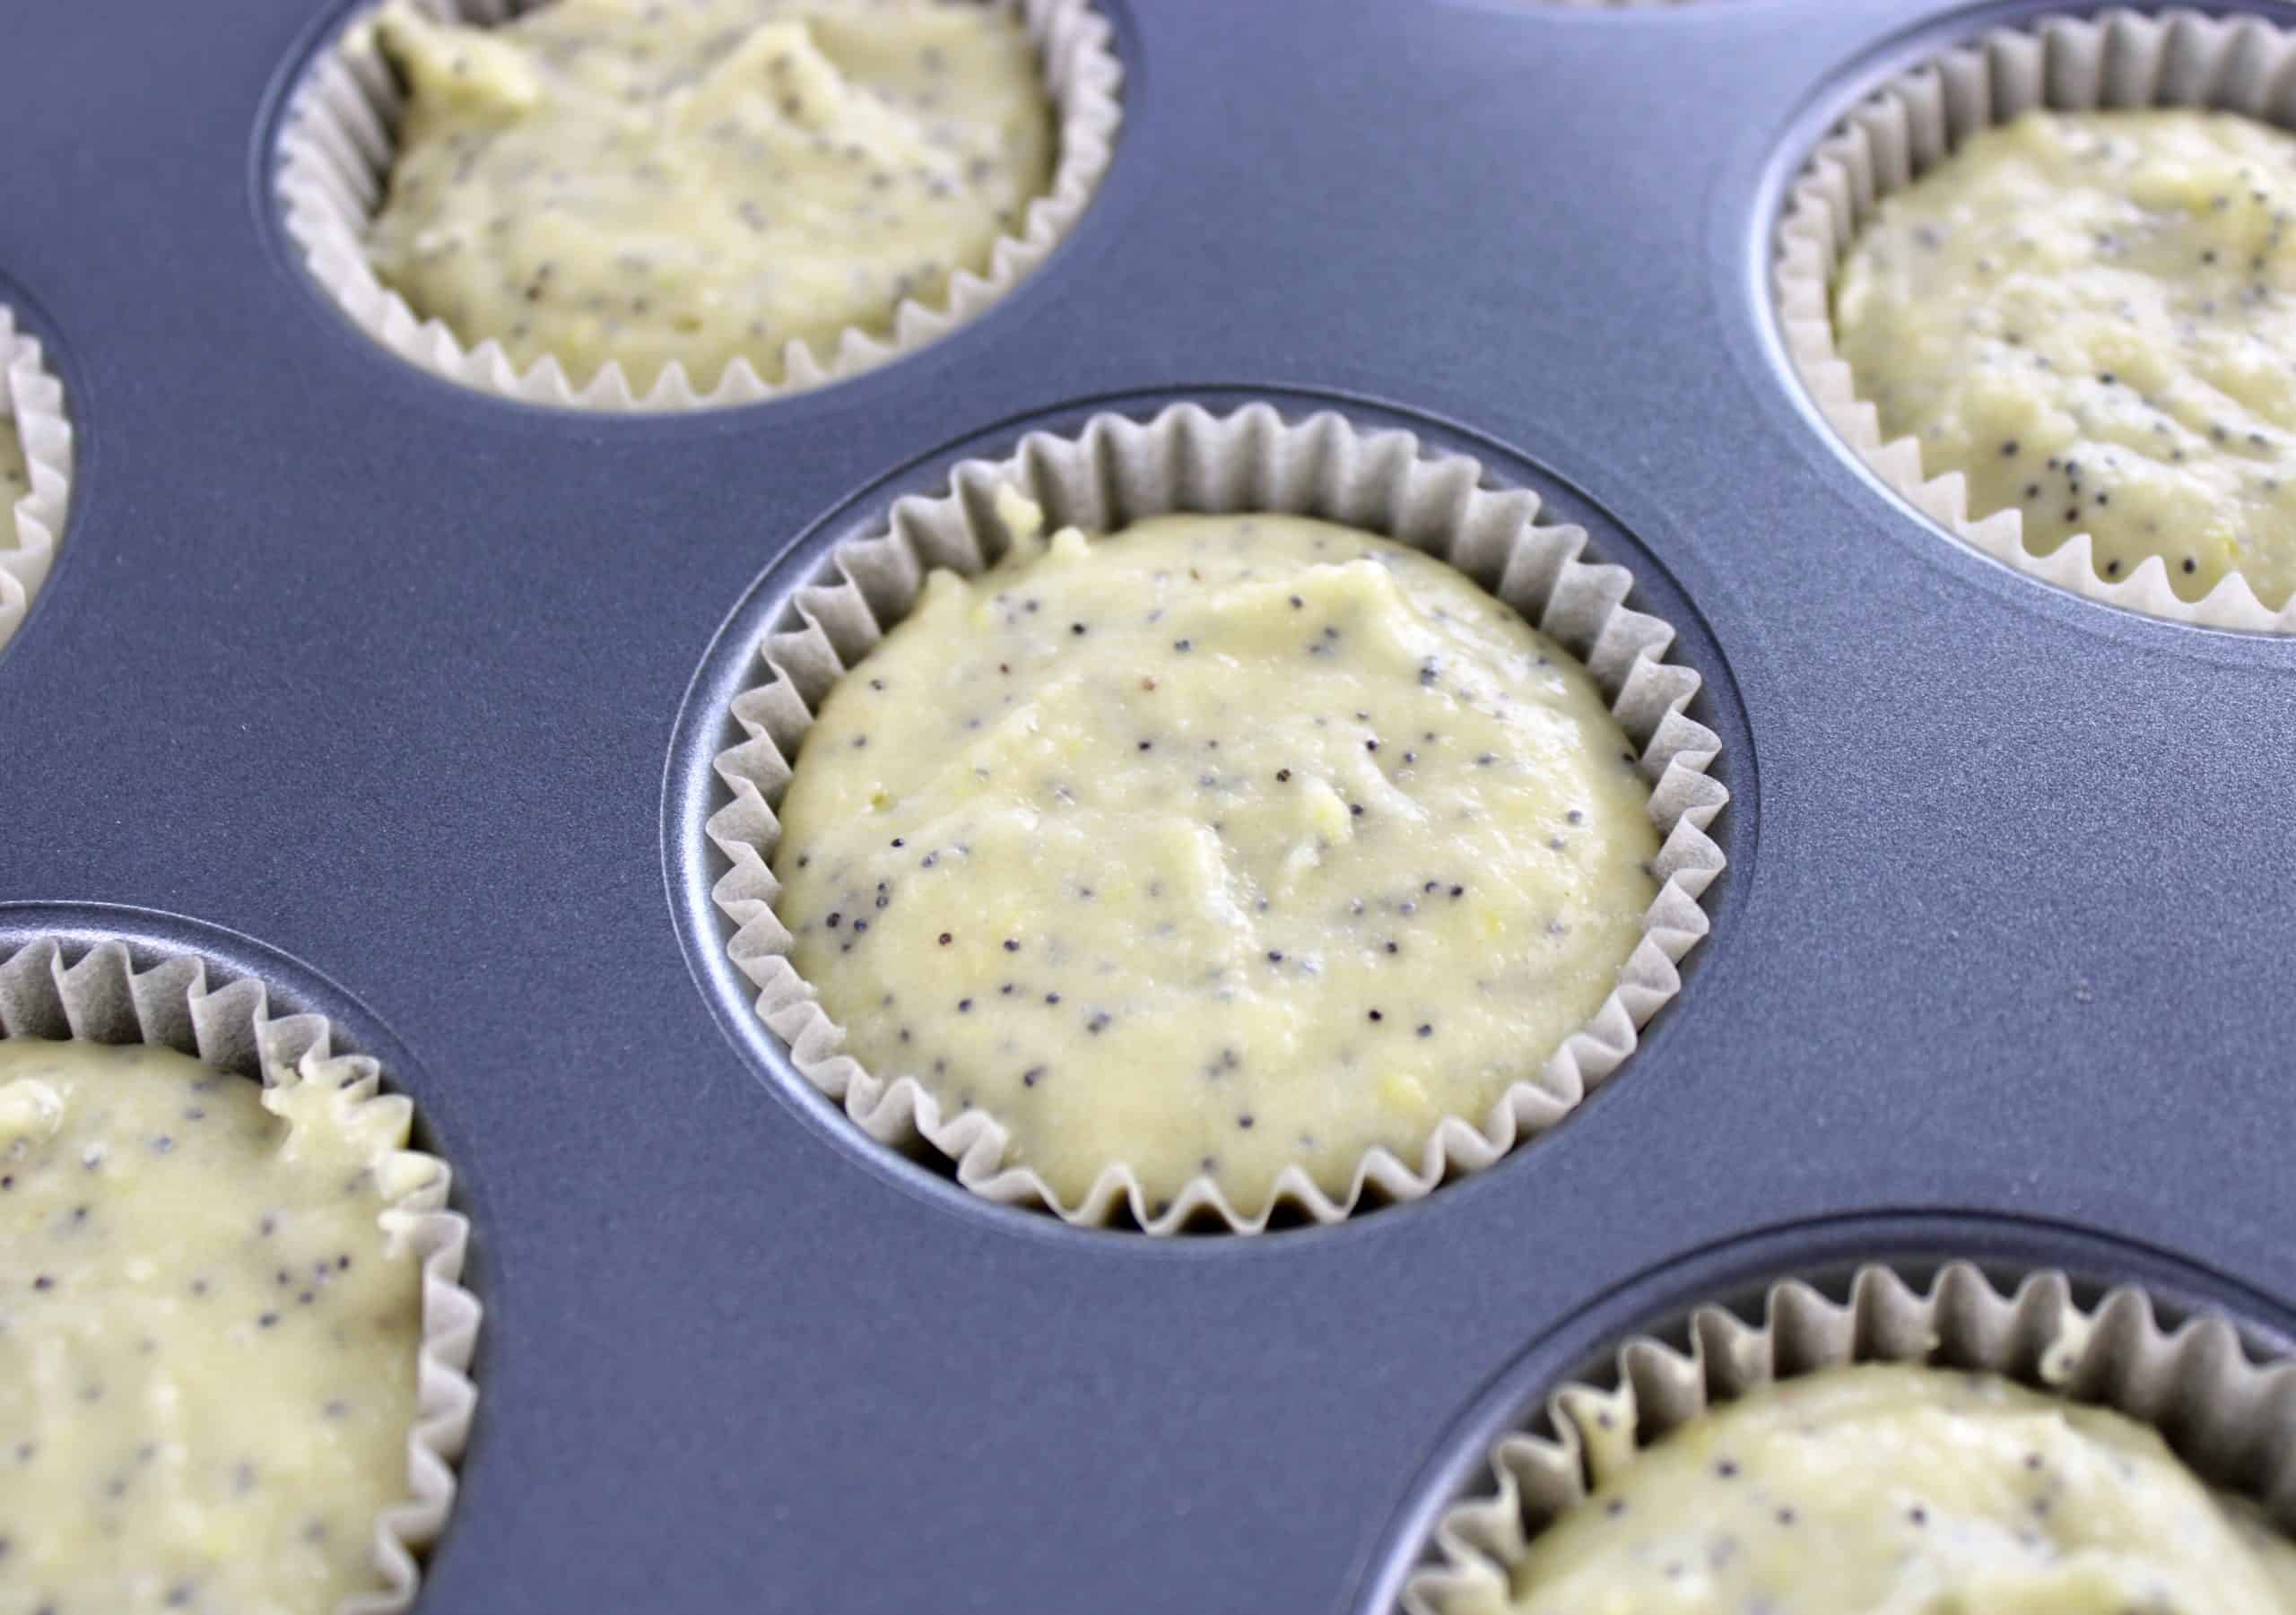 Keto Lemon Poppy Seed Muffins in muffin pan with liners unbaked